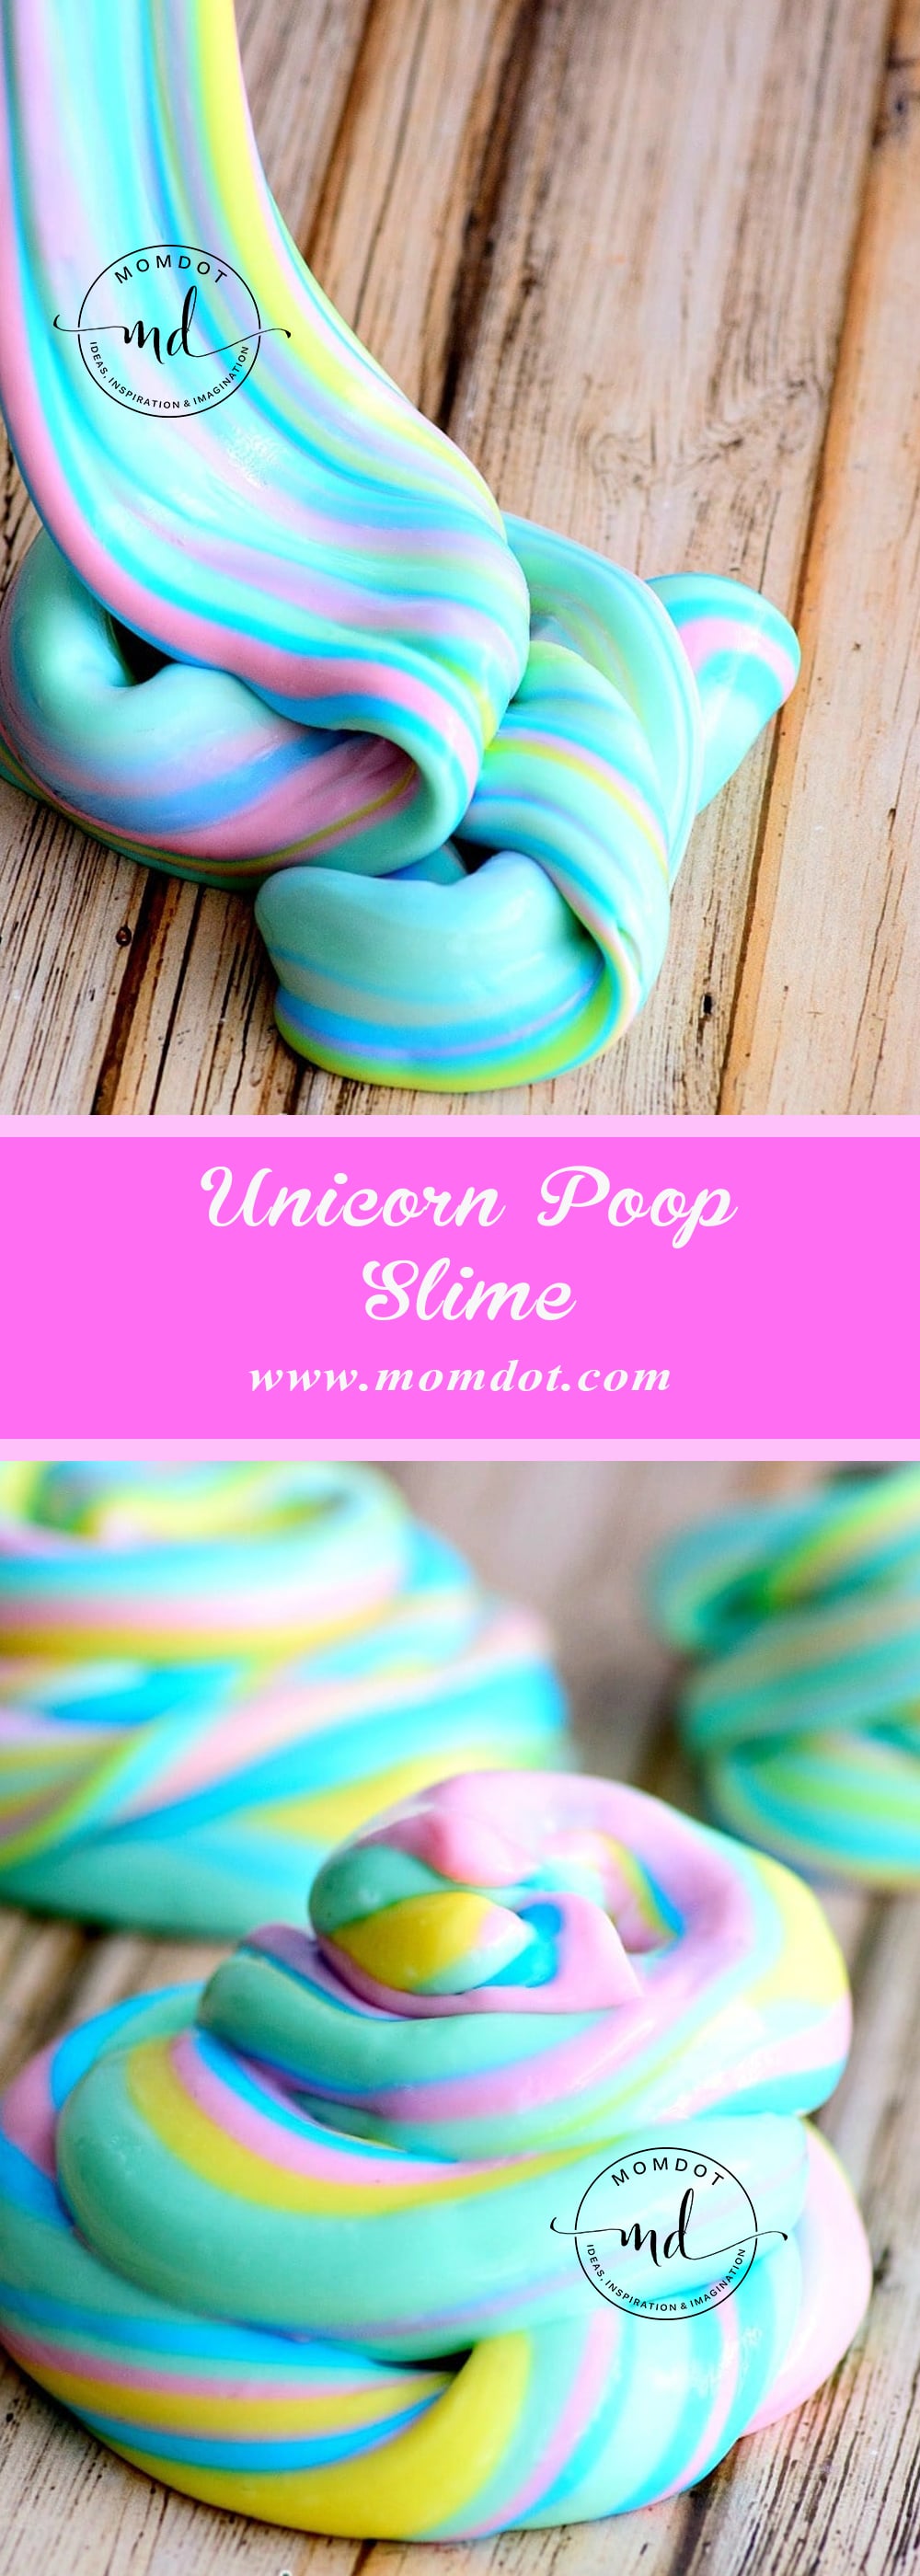 Unicorn poop slime piled on the table in all its pastel rainbow glory.